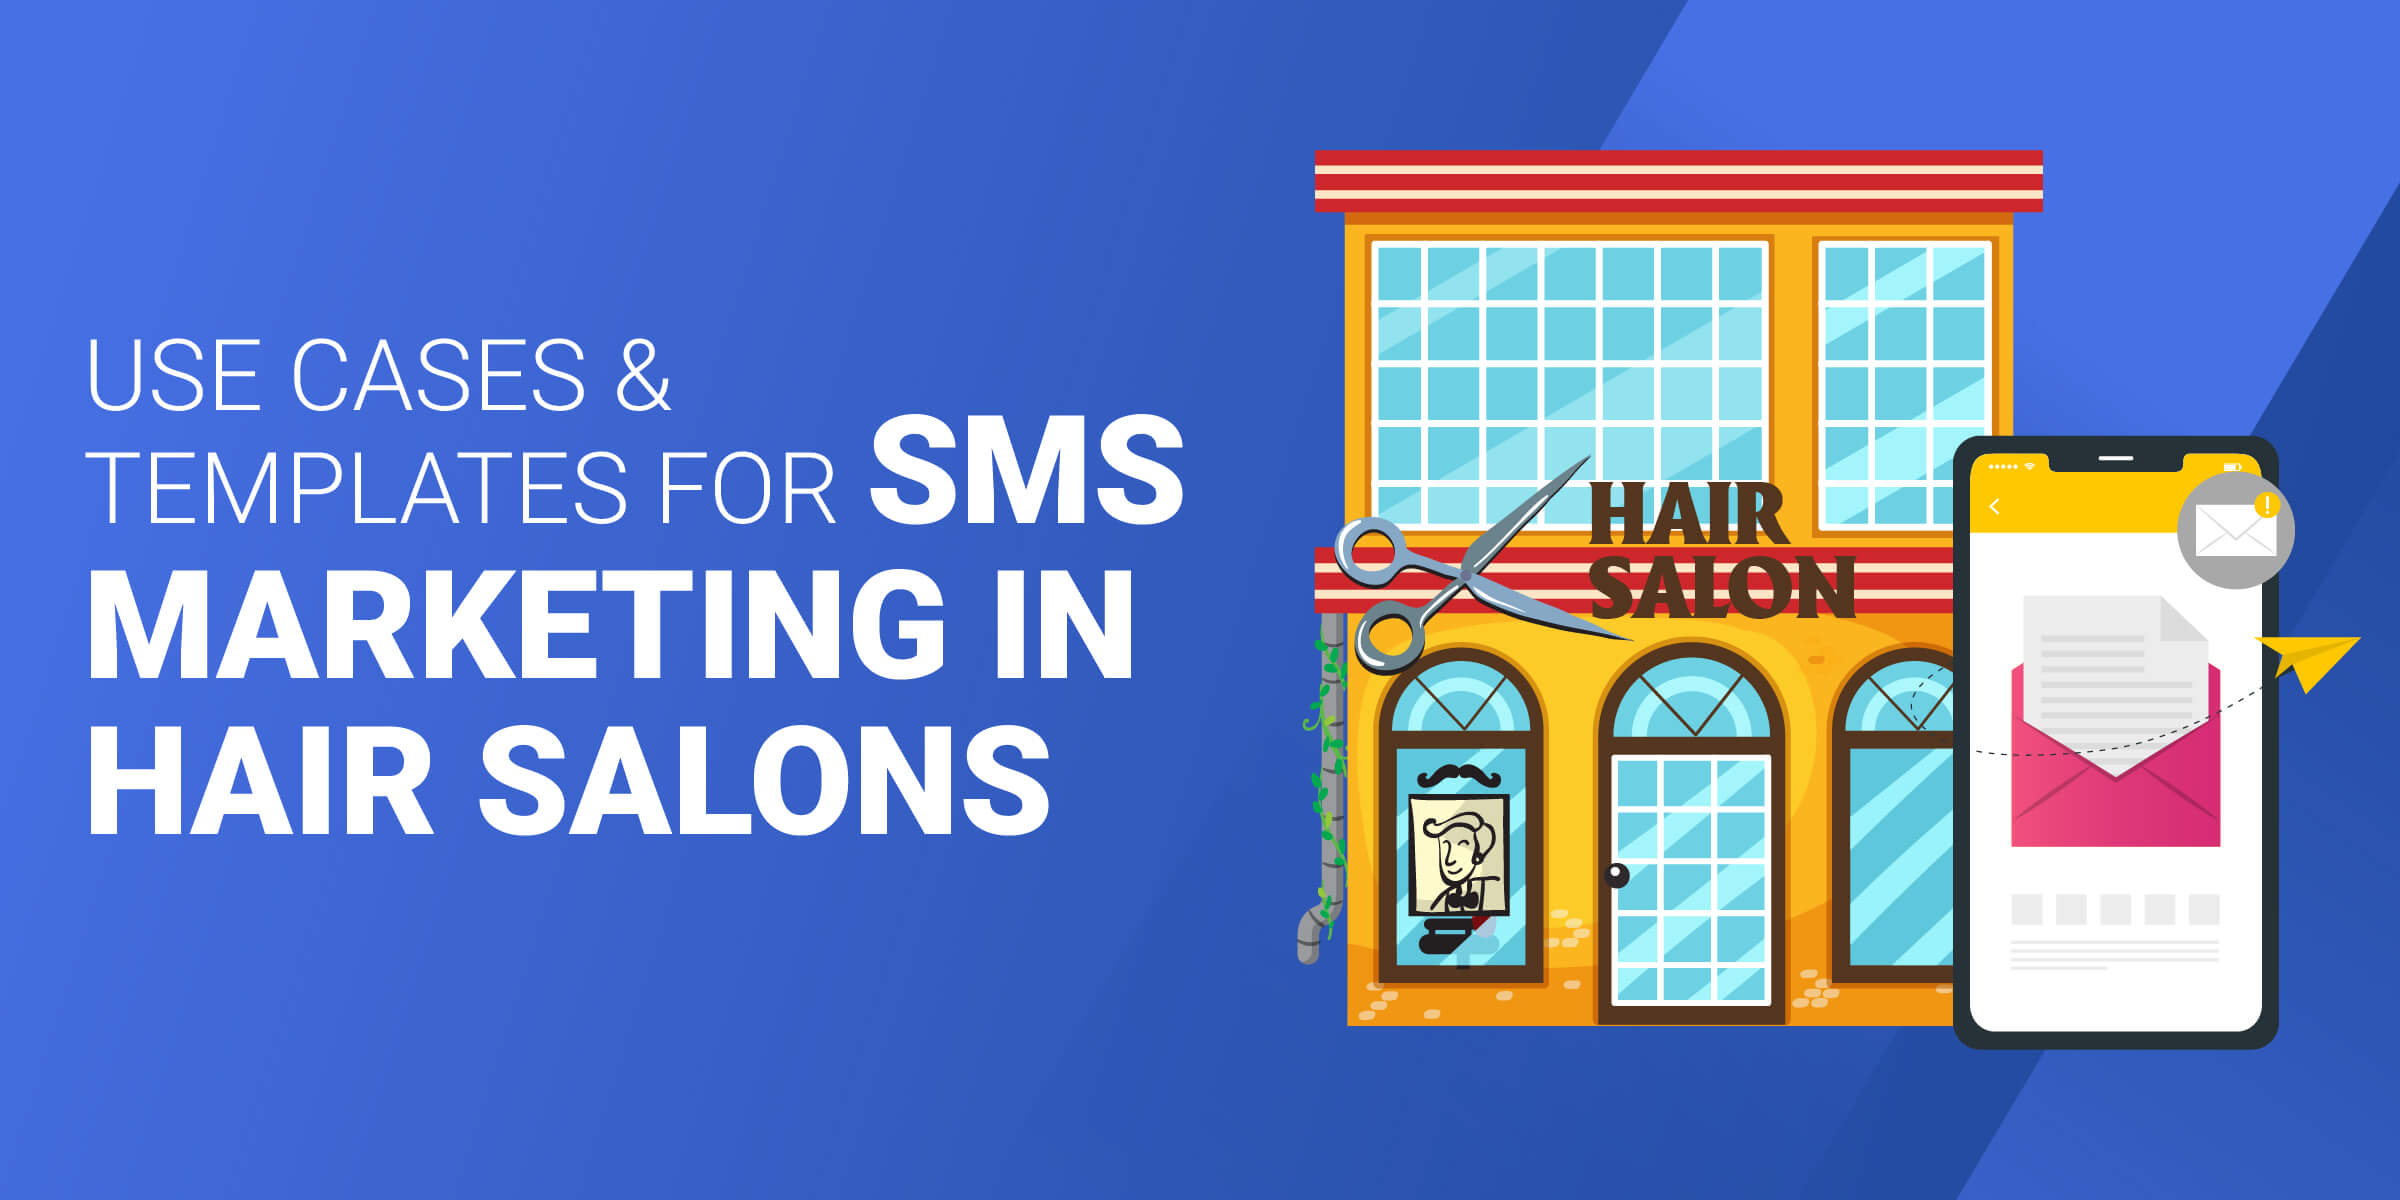 Use Case and Template for SMS Marketing Hair Salons